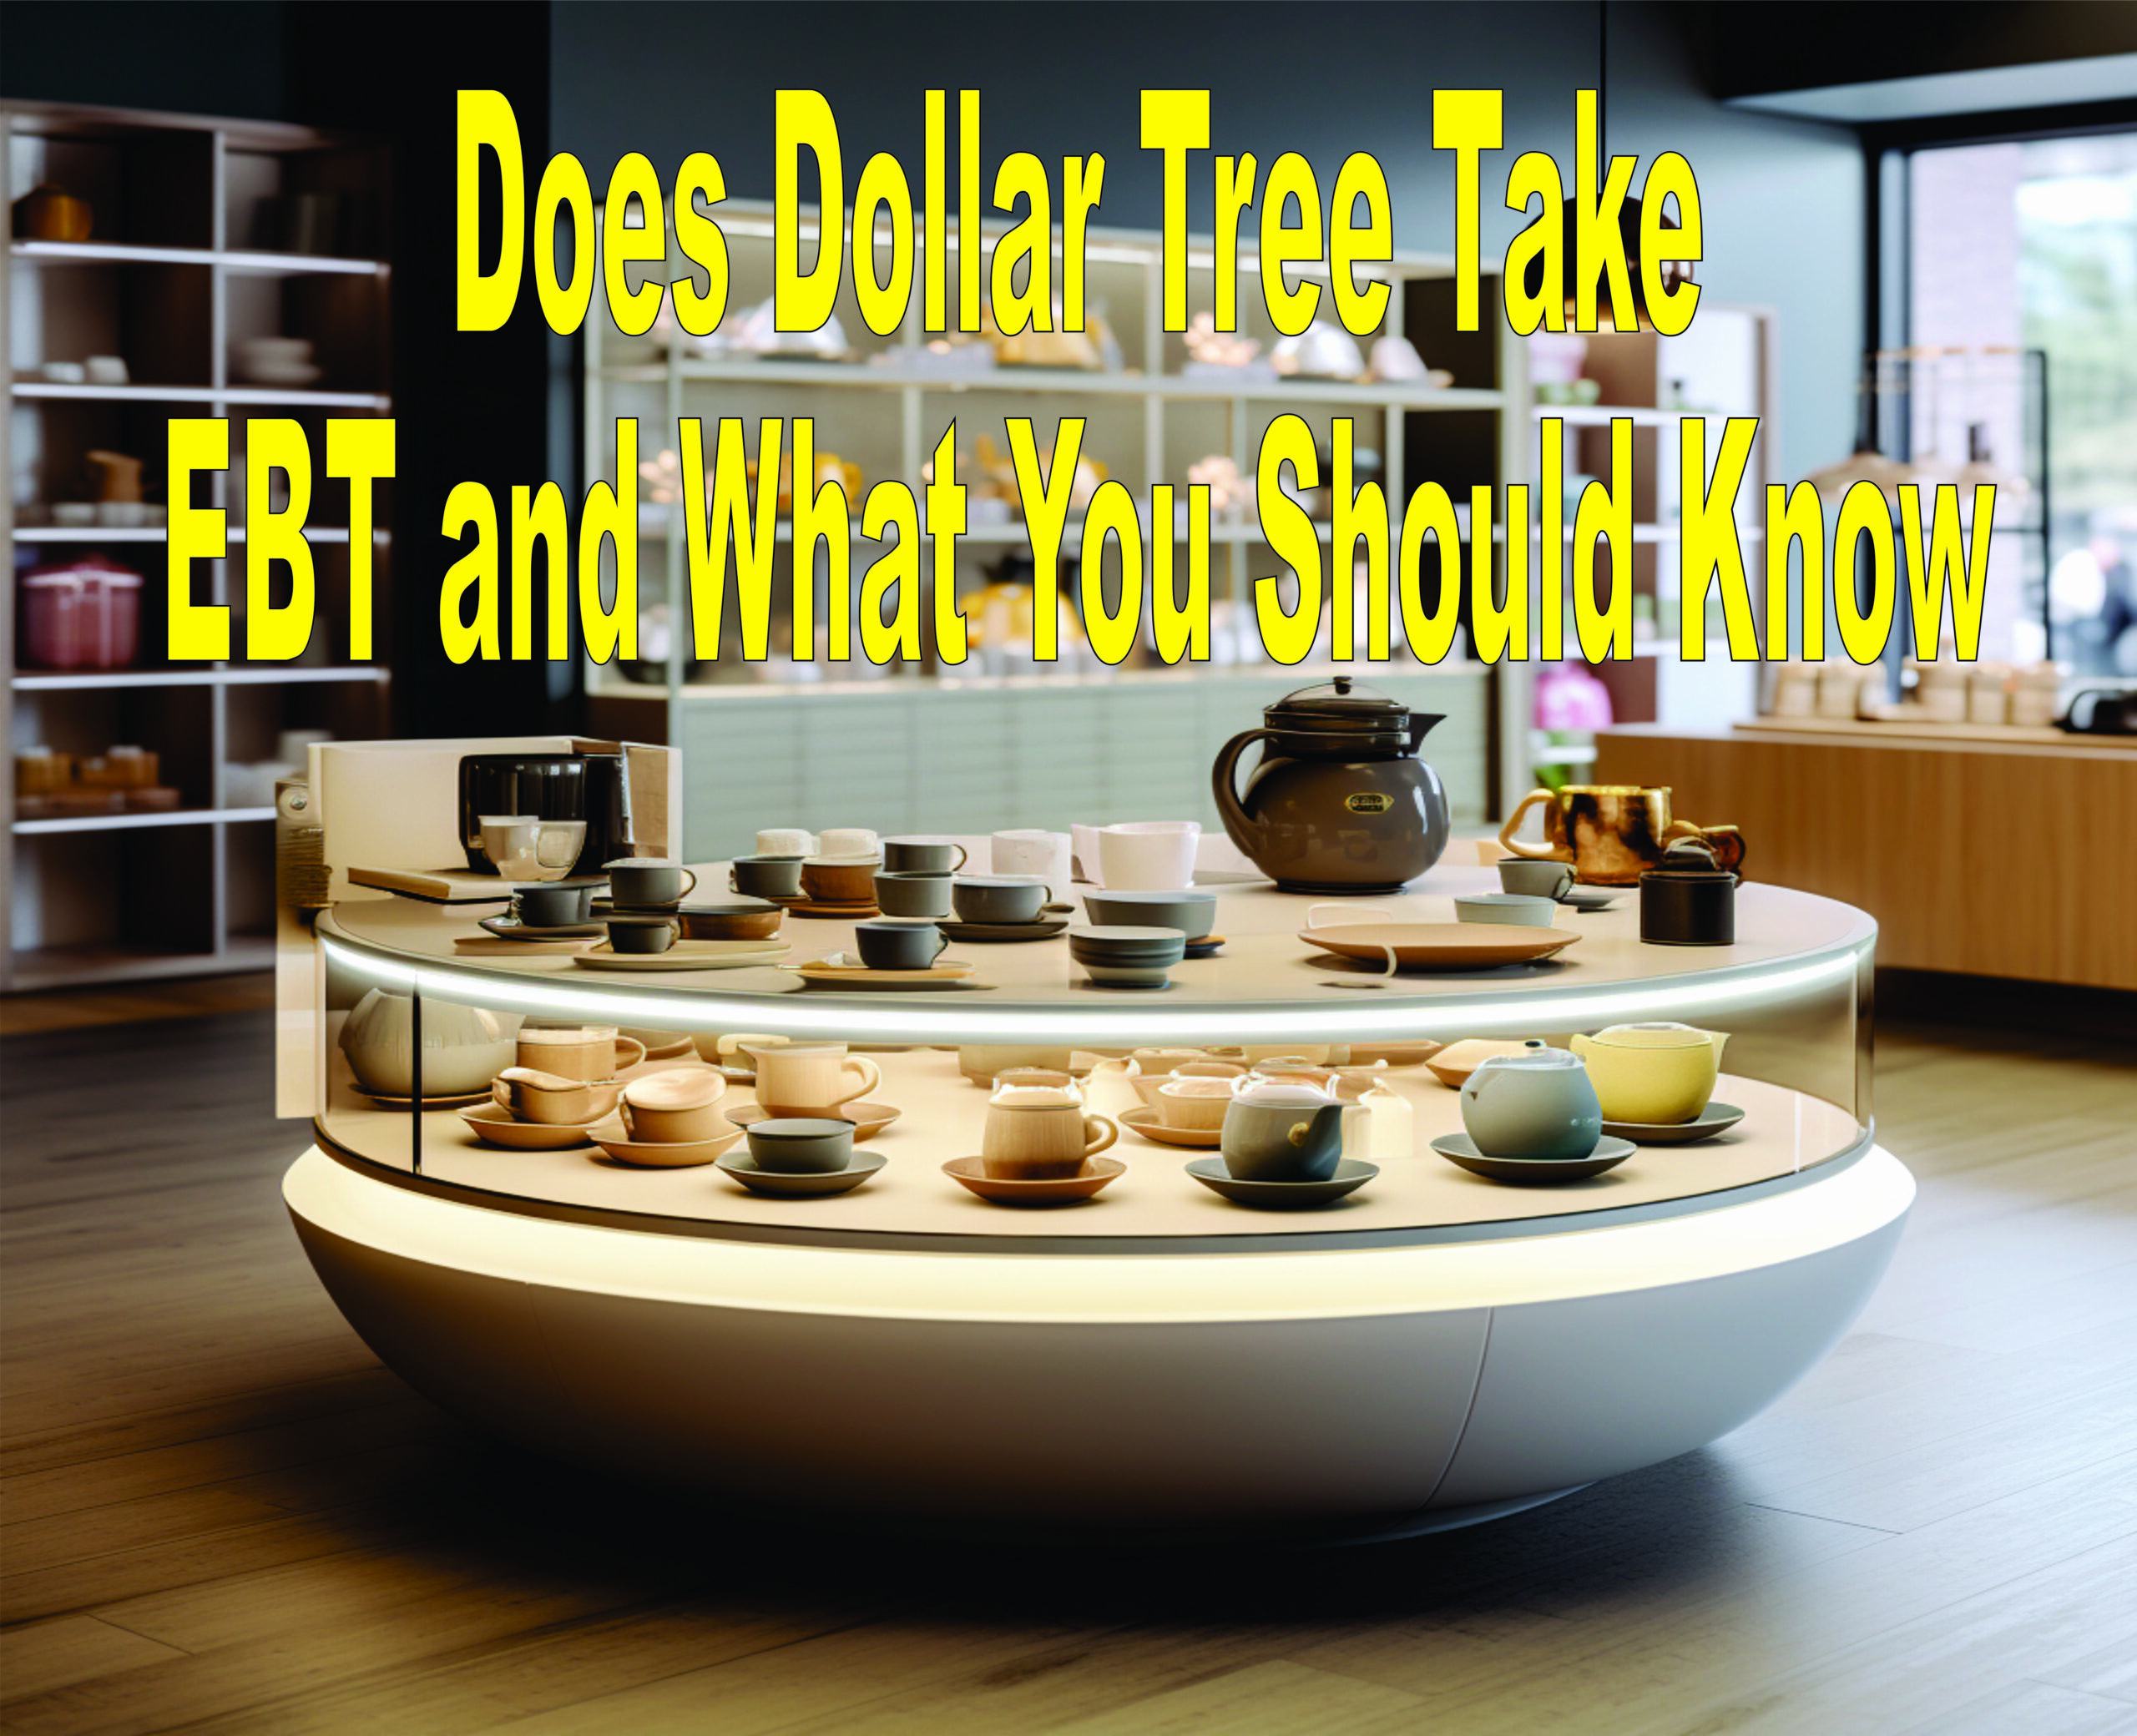 Does Dollar Tree Take Ebt And What You Should Know